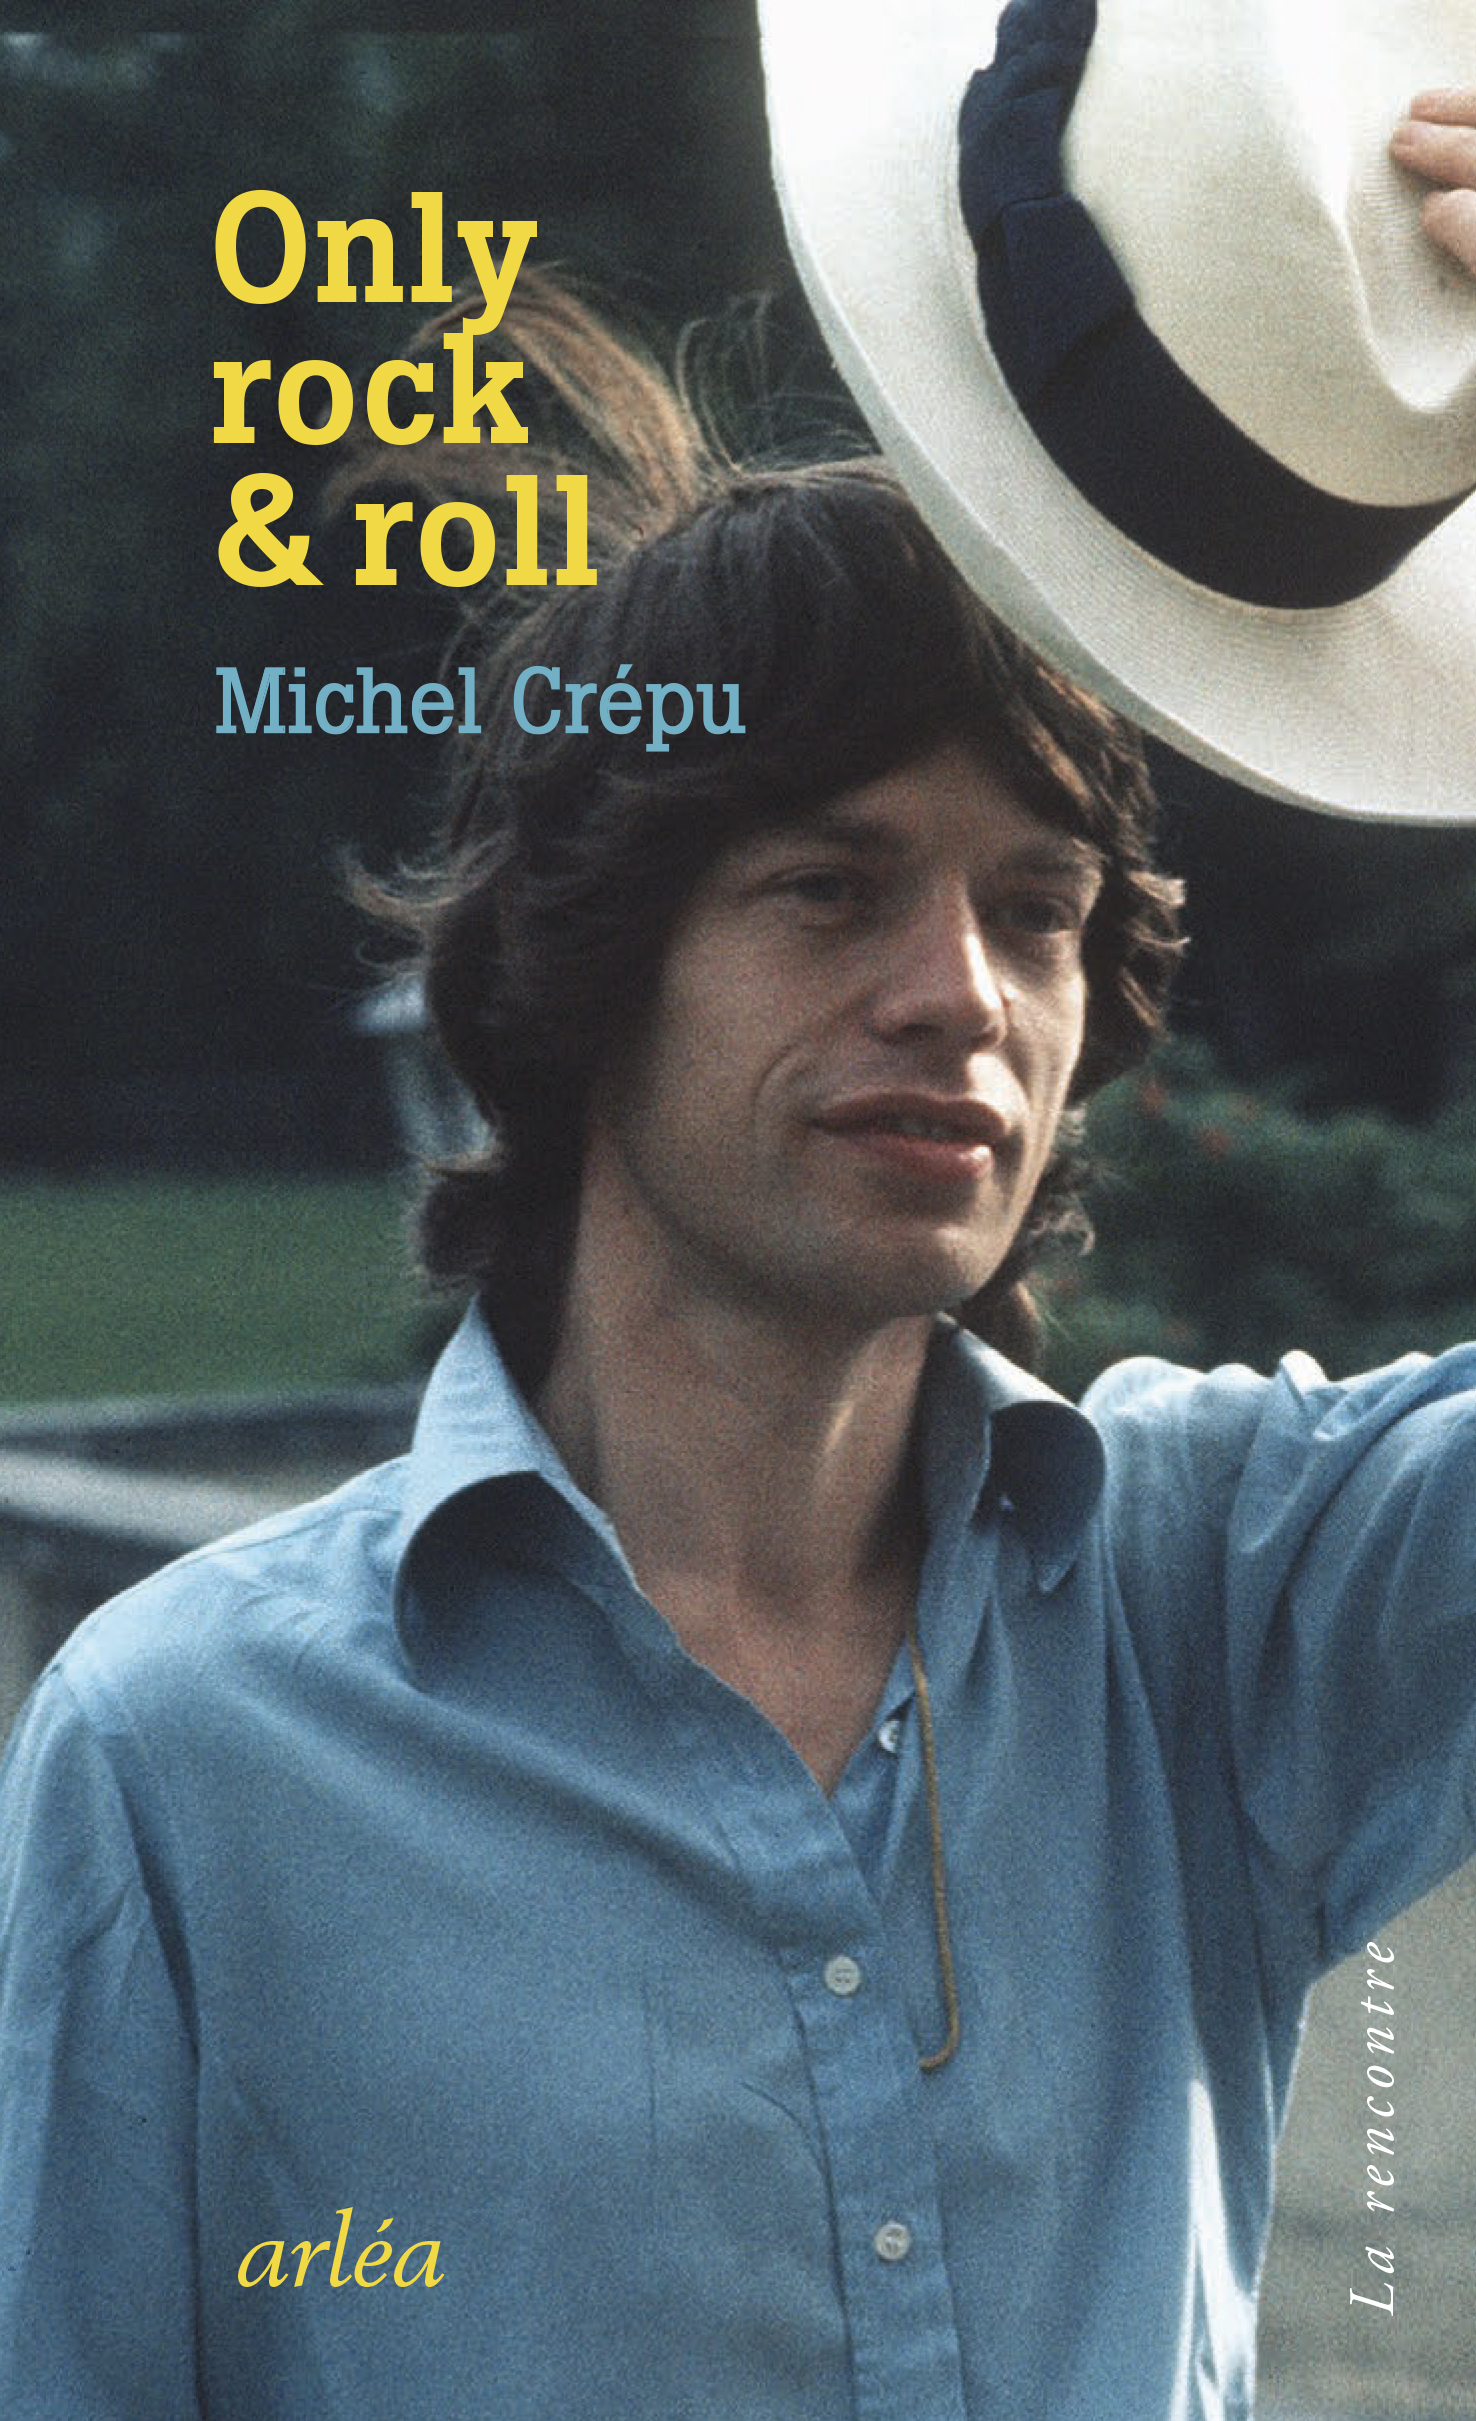 Couverture du livre Only rock and roll